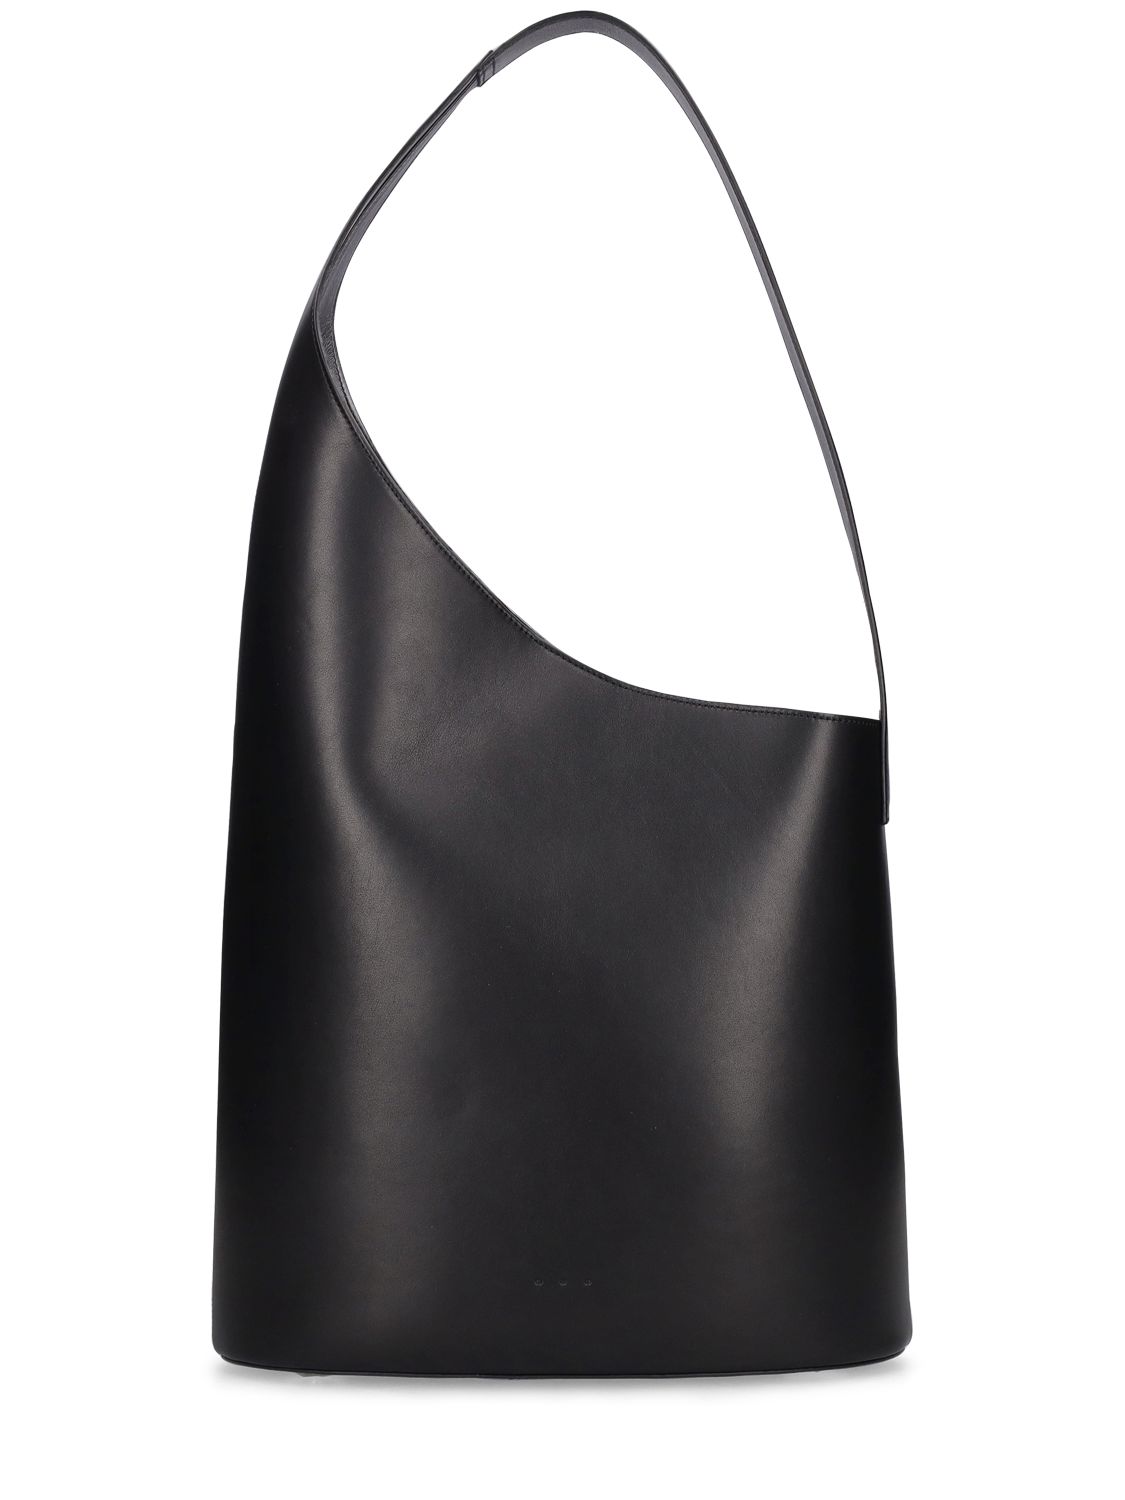 Lune Tote Smooth Leather Bag